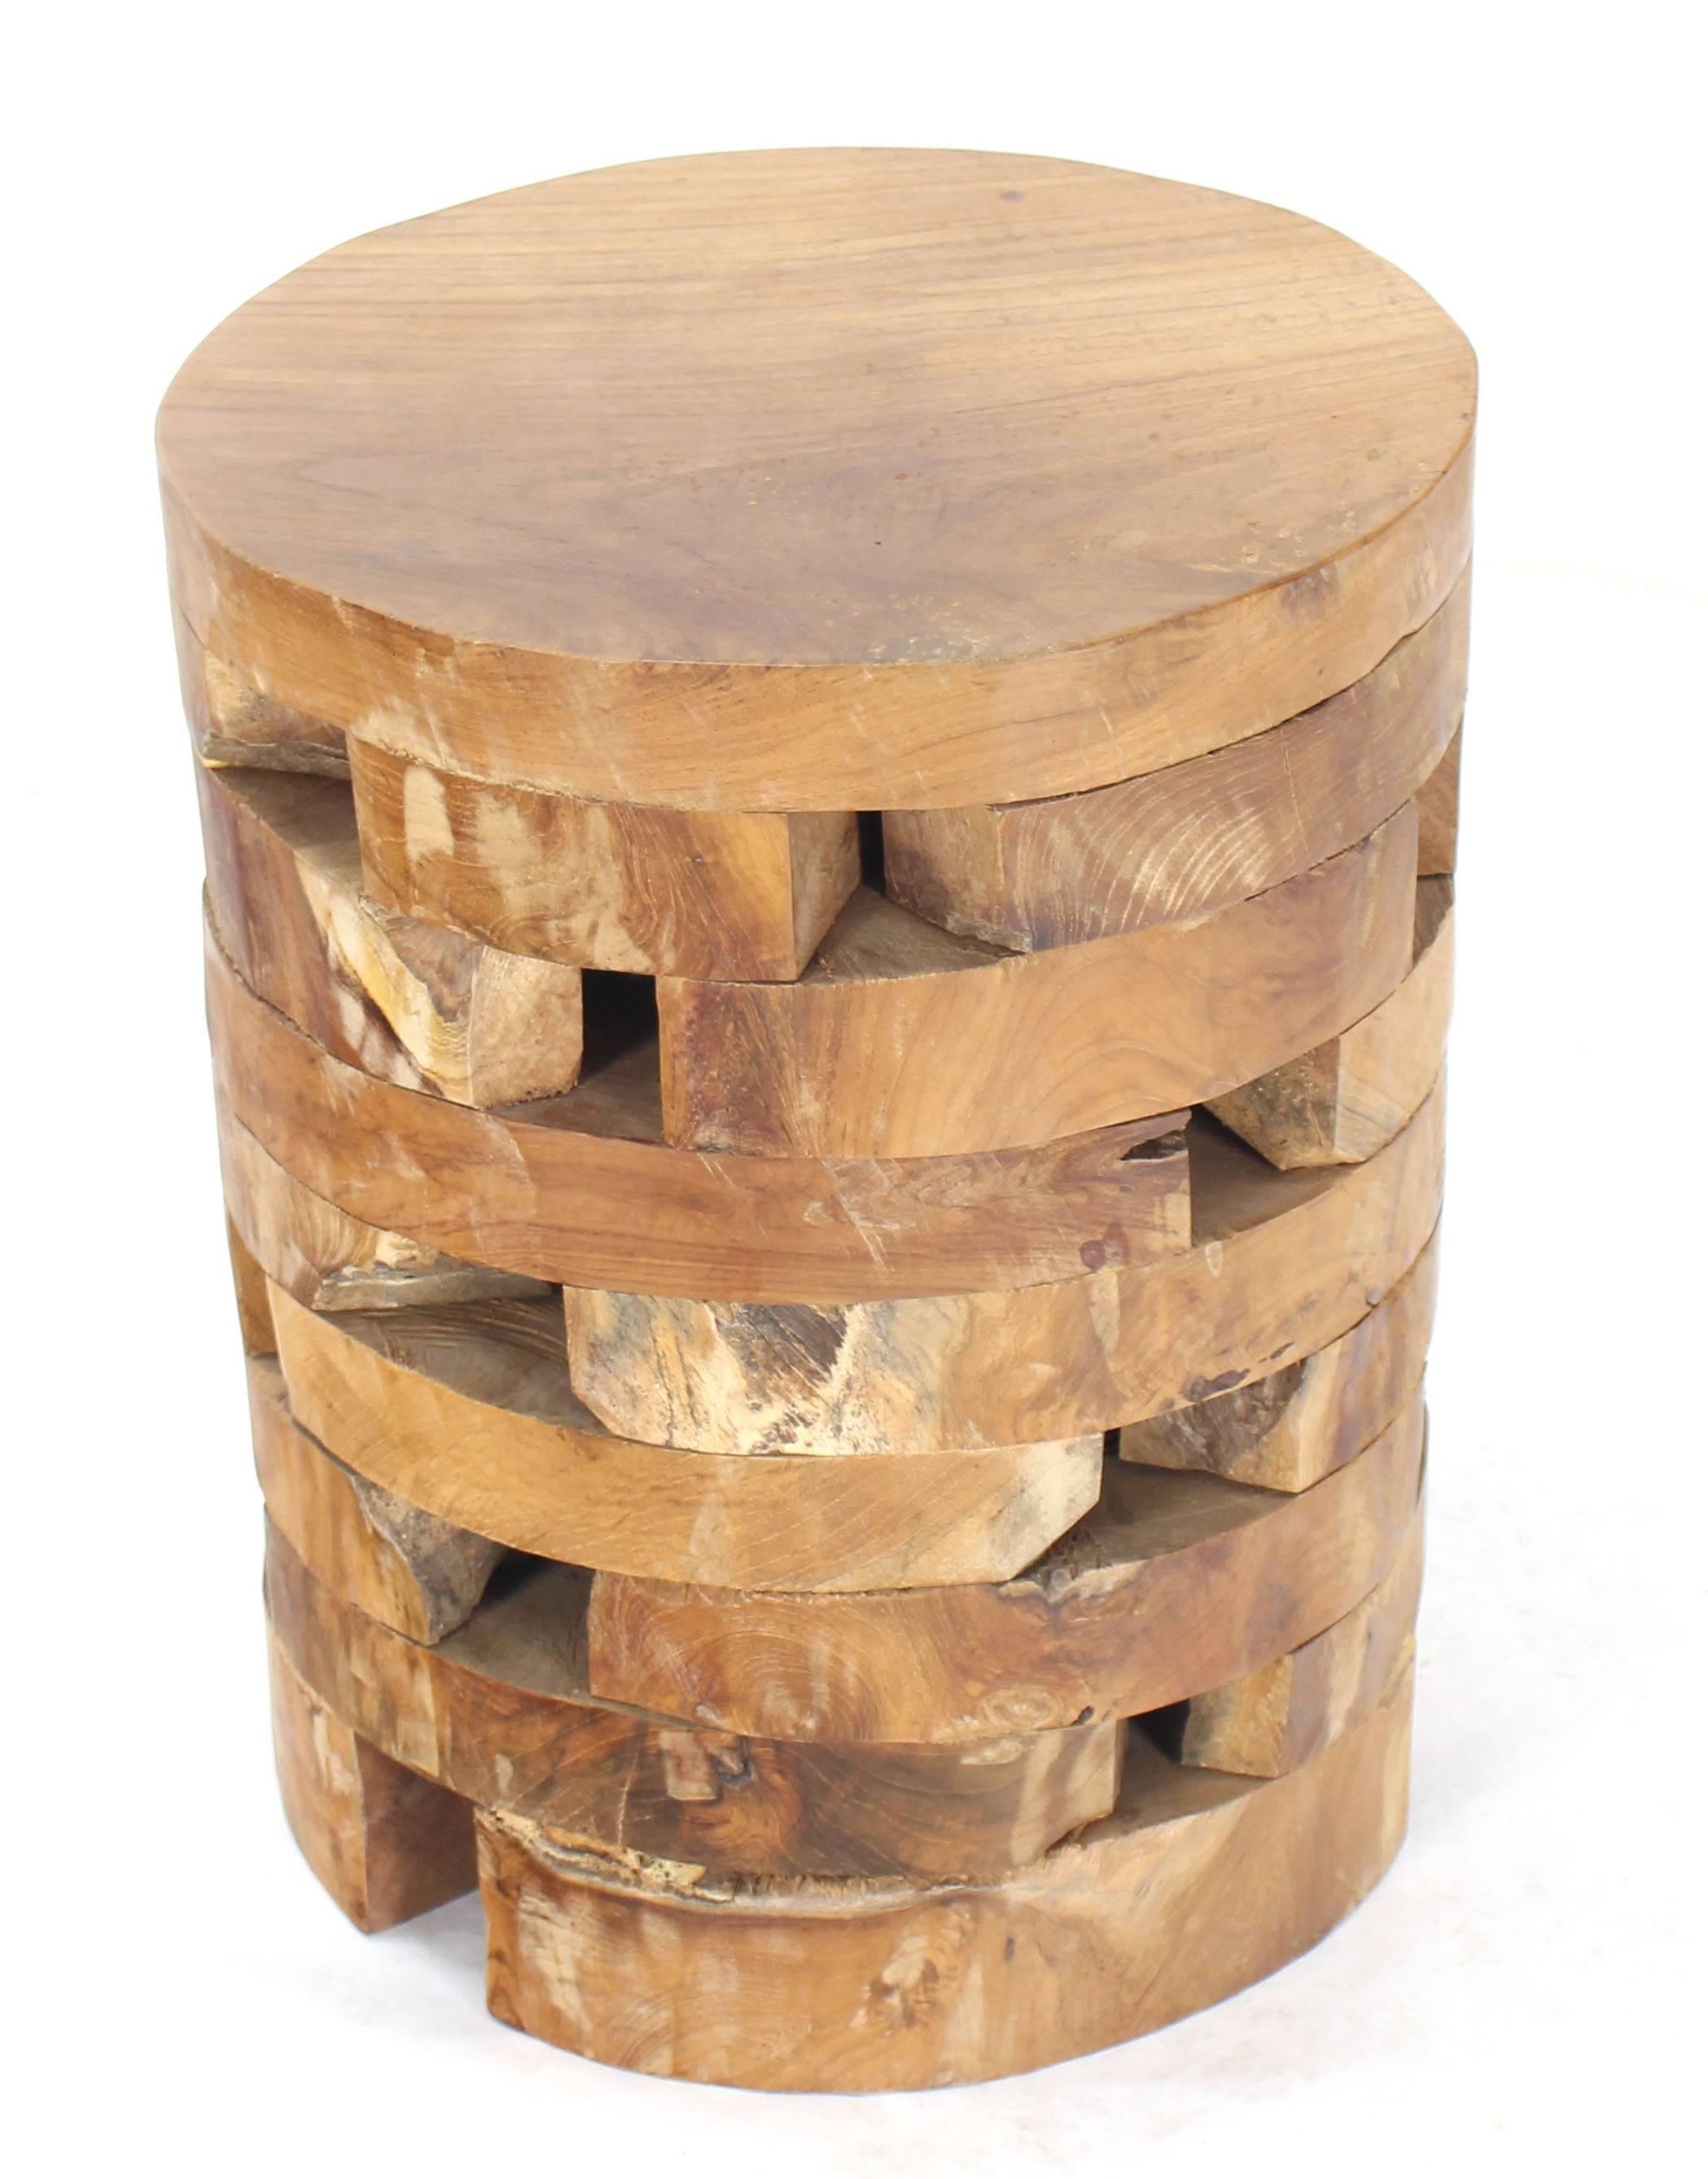 Stacked teak wood blocks side table bench stool or pedestal. This is a nice heavy and very solid piece.